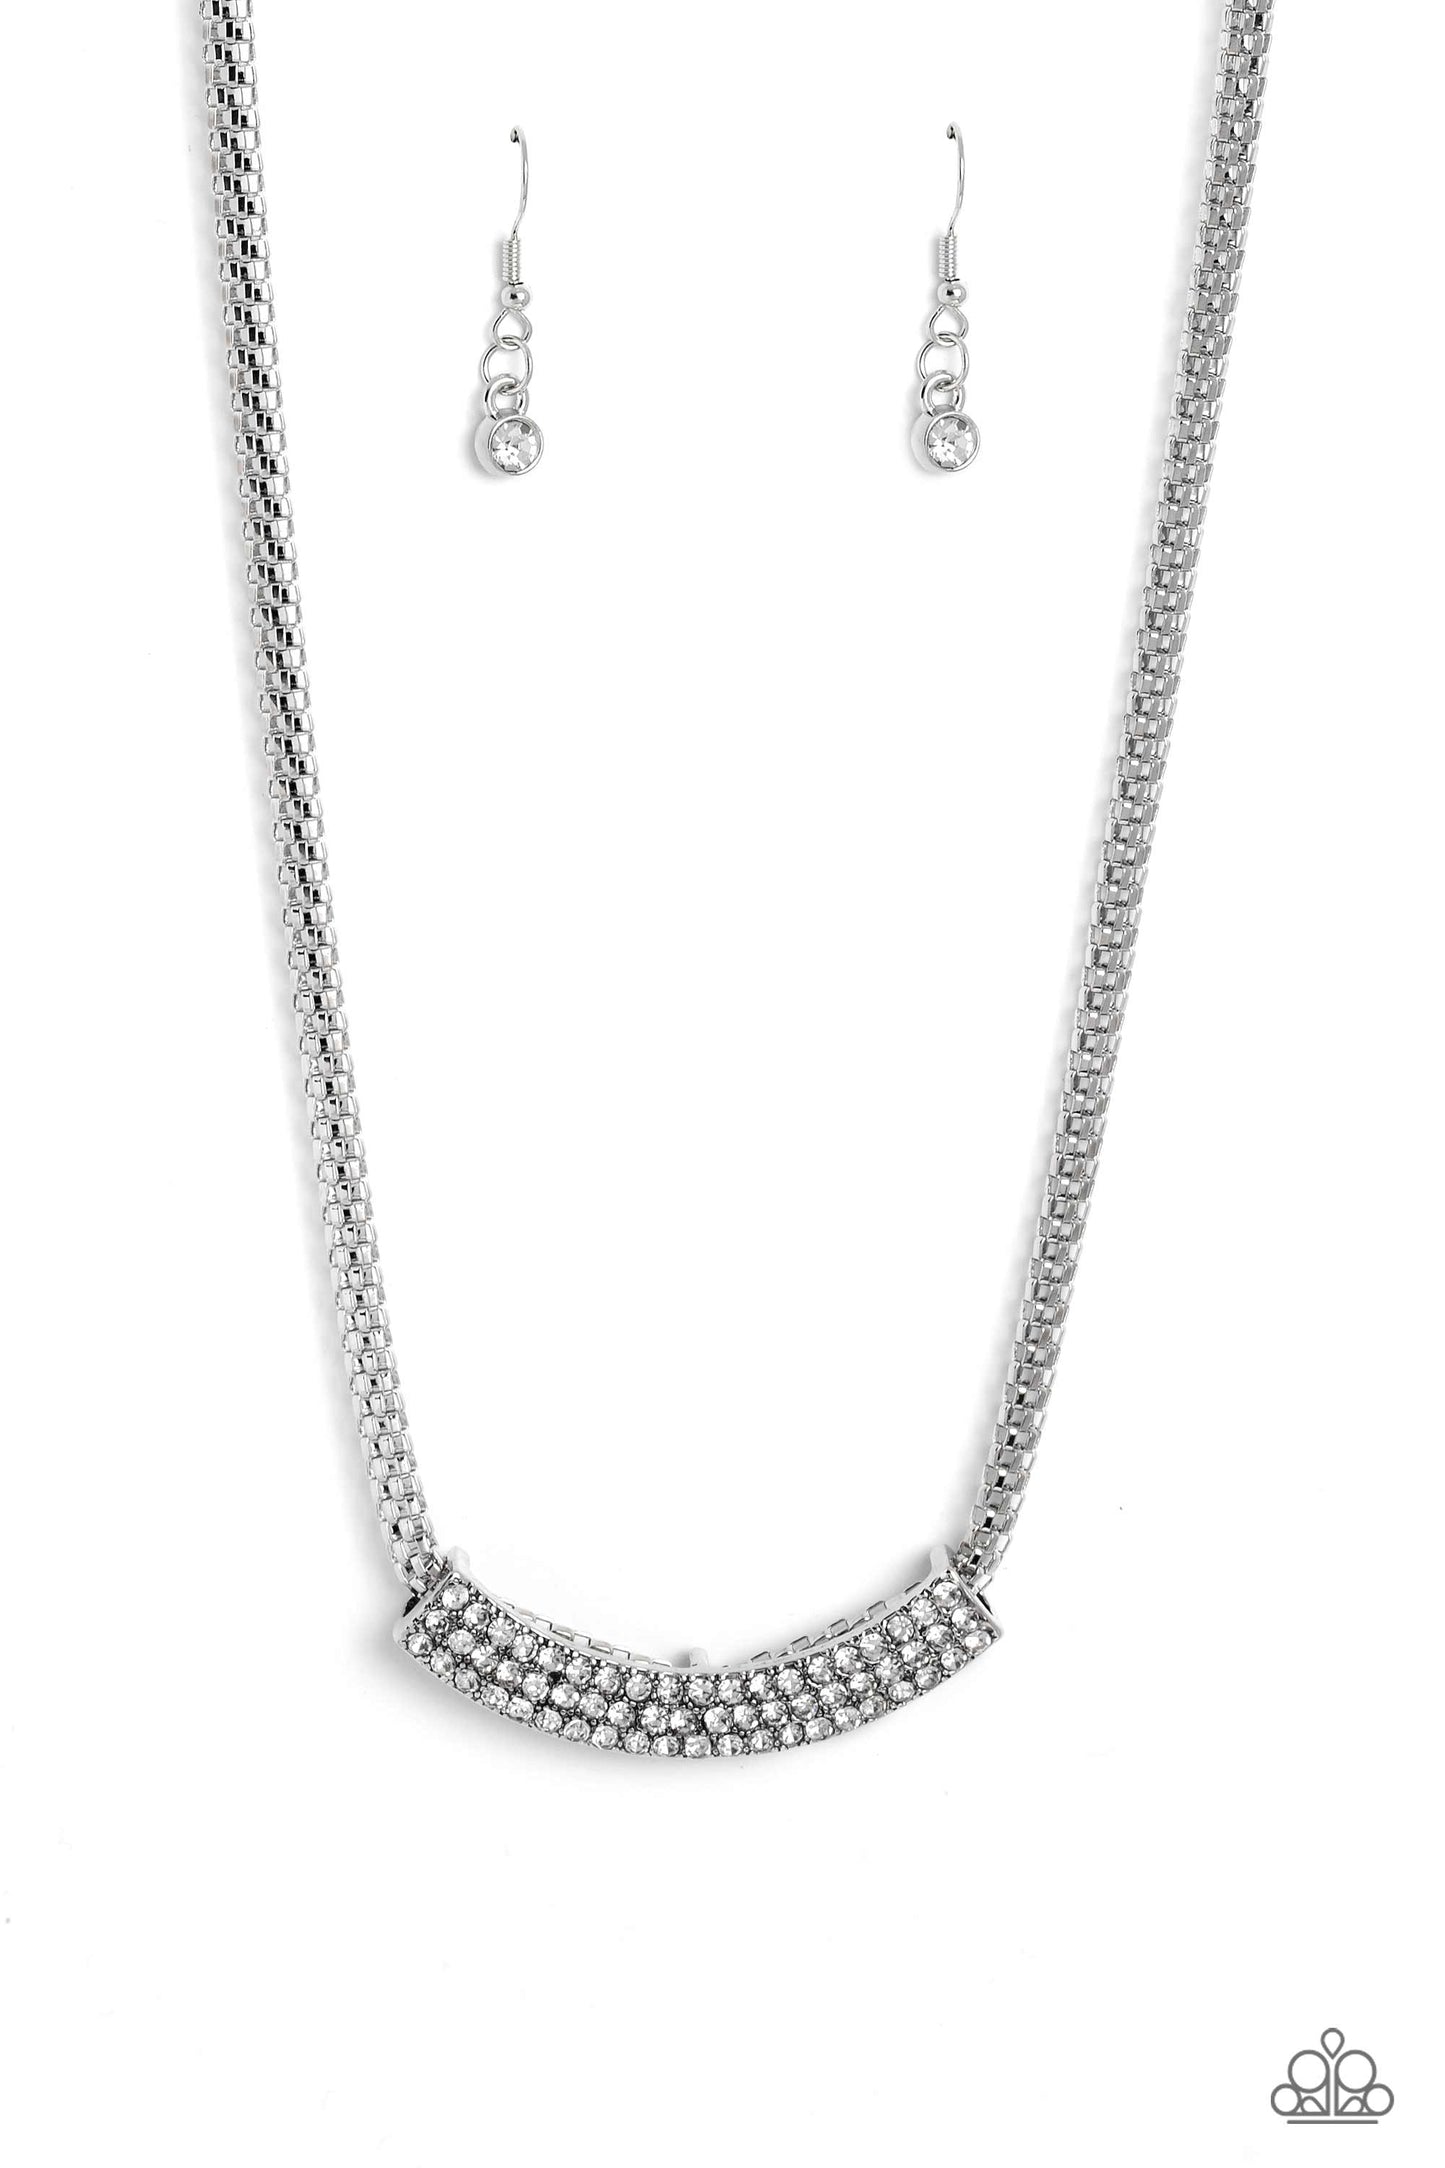 Paparazzi Accessories - Swing Dance Dream - Silver Necklaces featuring a high-sheen finish, a curved silver pendant slides along a rounded silver mesh chain below the collar. Three rows of dainty white rhinestones encrusted along the silver frame, add hints of shimmer to the bold industrial palette. Features an adjustable clasp closure.  Sold as one individual necklace. Includes one pair of matching earrings.